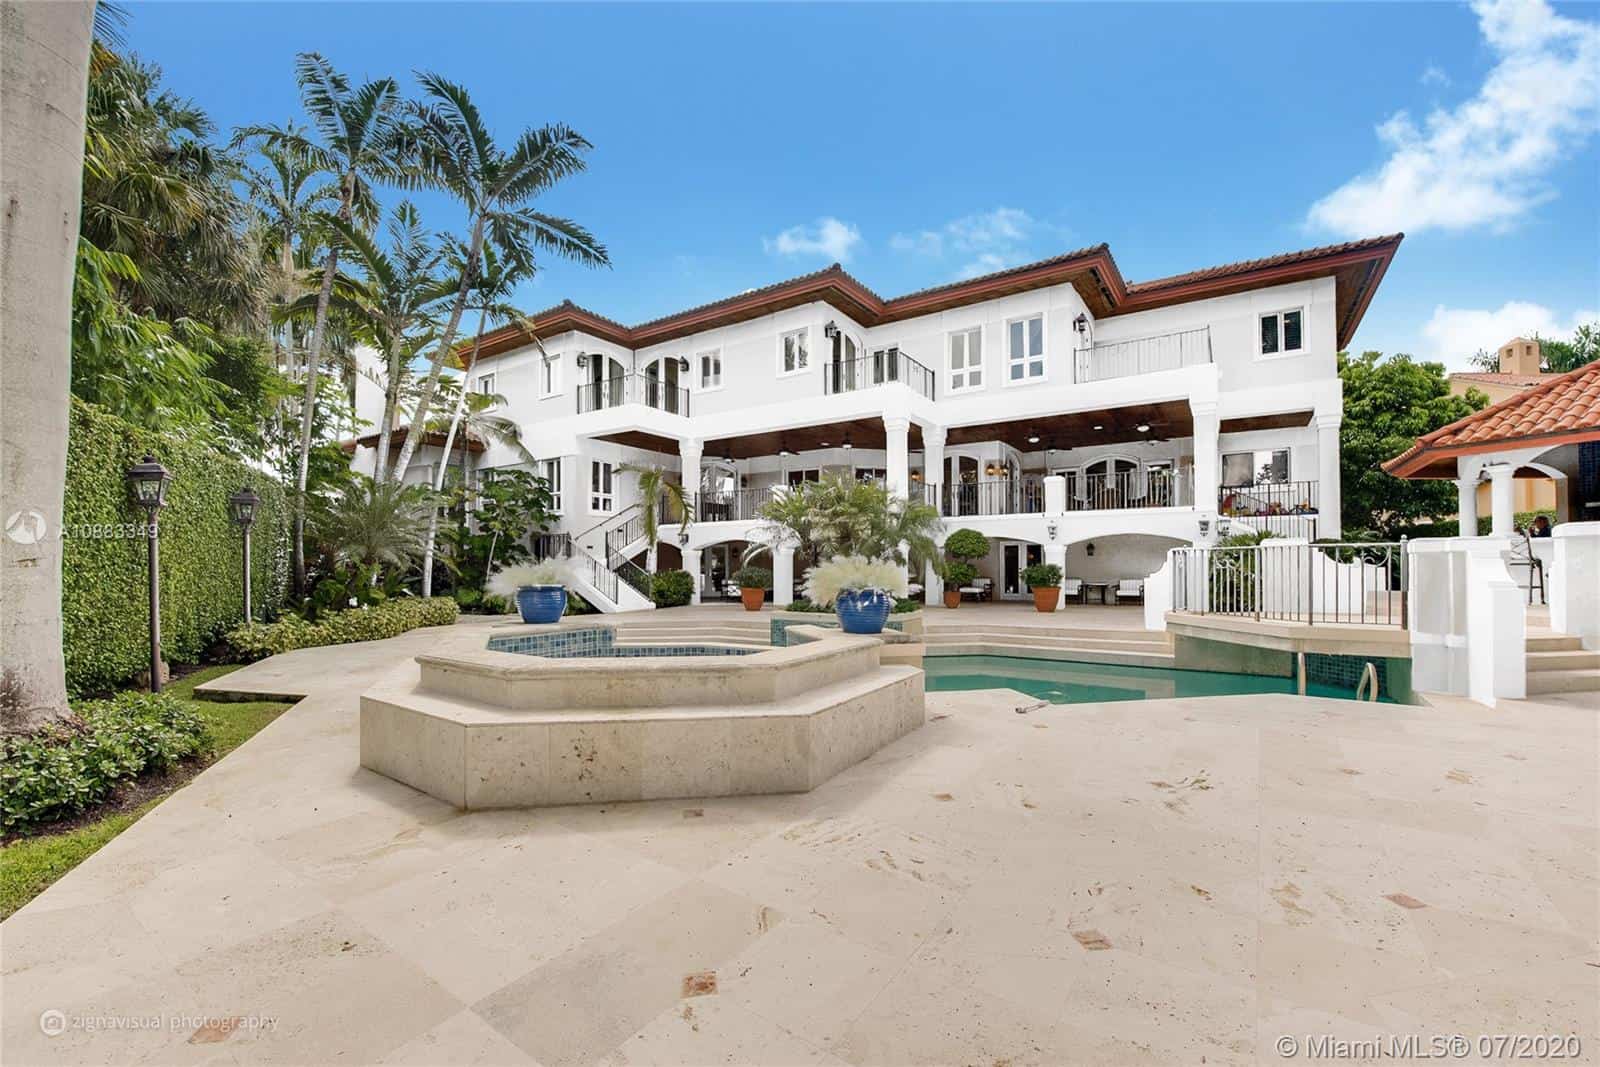 380 Isla Dorada Blvd, Coral Gables: Ultra-Luxury Homes for Sale in Coral Gables